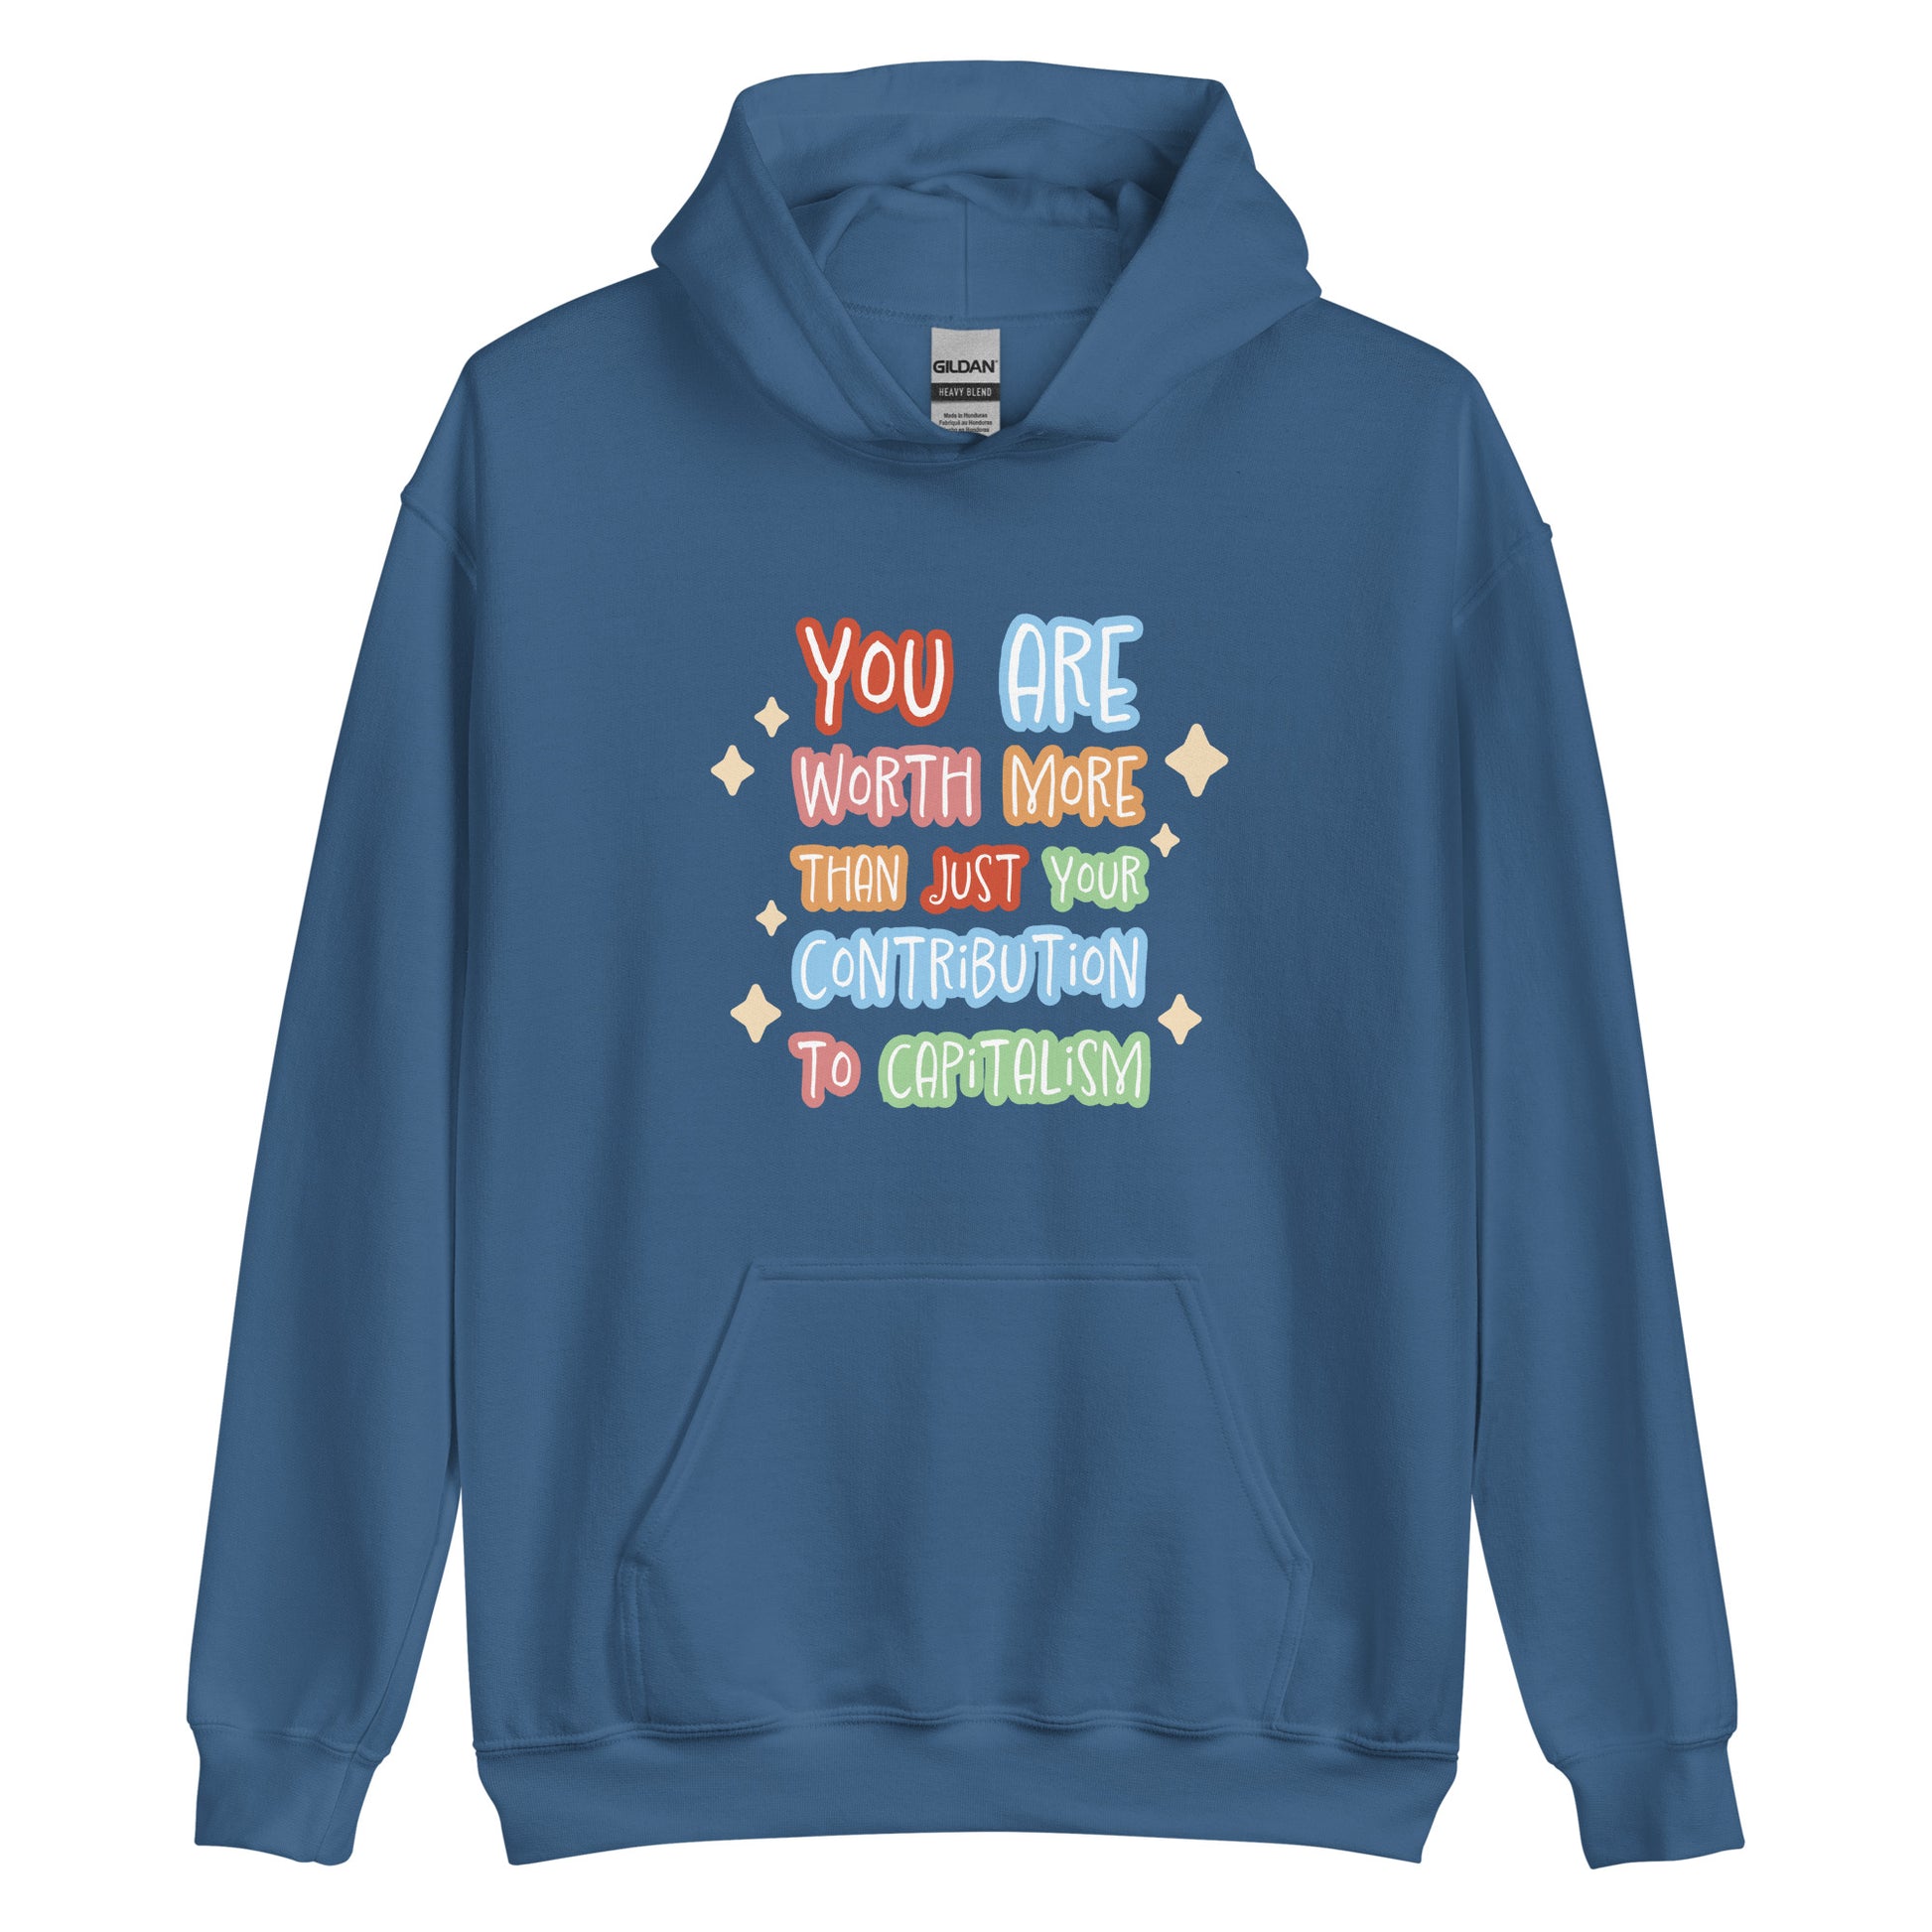 A blue hooded sweatshirt featuring colorful hand-written-style text that reads "You are worth more than just your contribution to capitalism". Sparkles surround the text on each side.